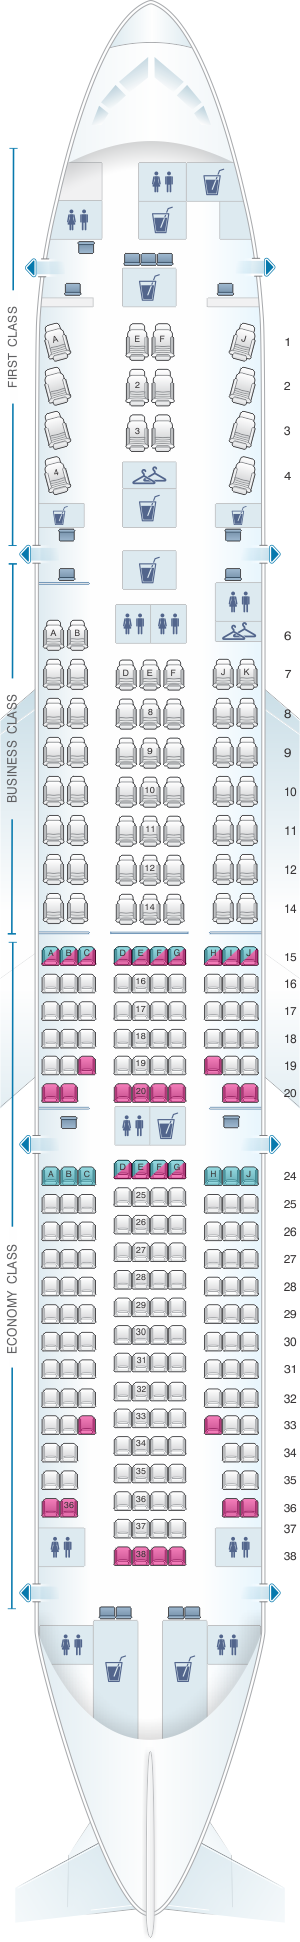 Seat map for TAAG Angola Airlines Boeing B777 200ER